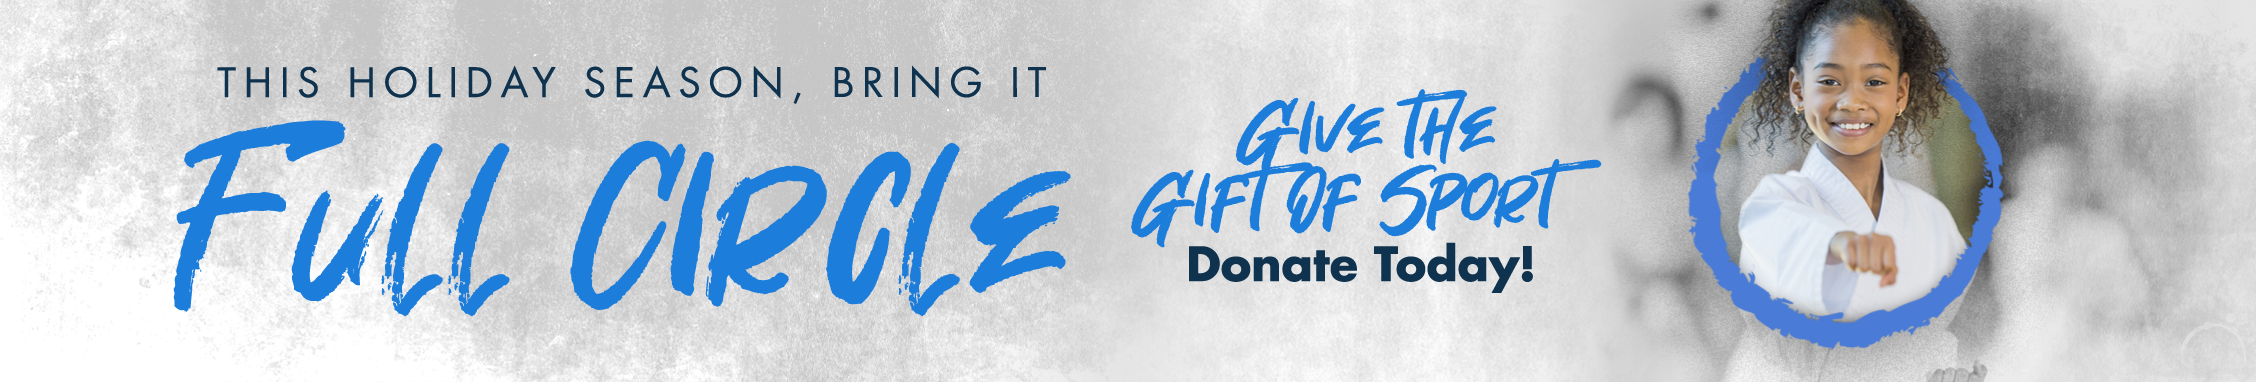 This Holiday season, bring it full circle. Give the gift of sport. donate today.